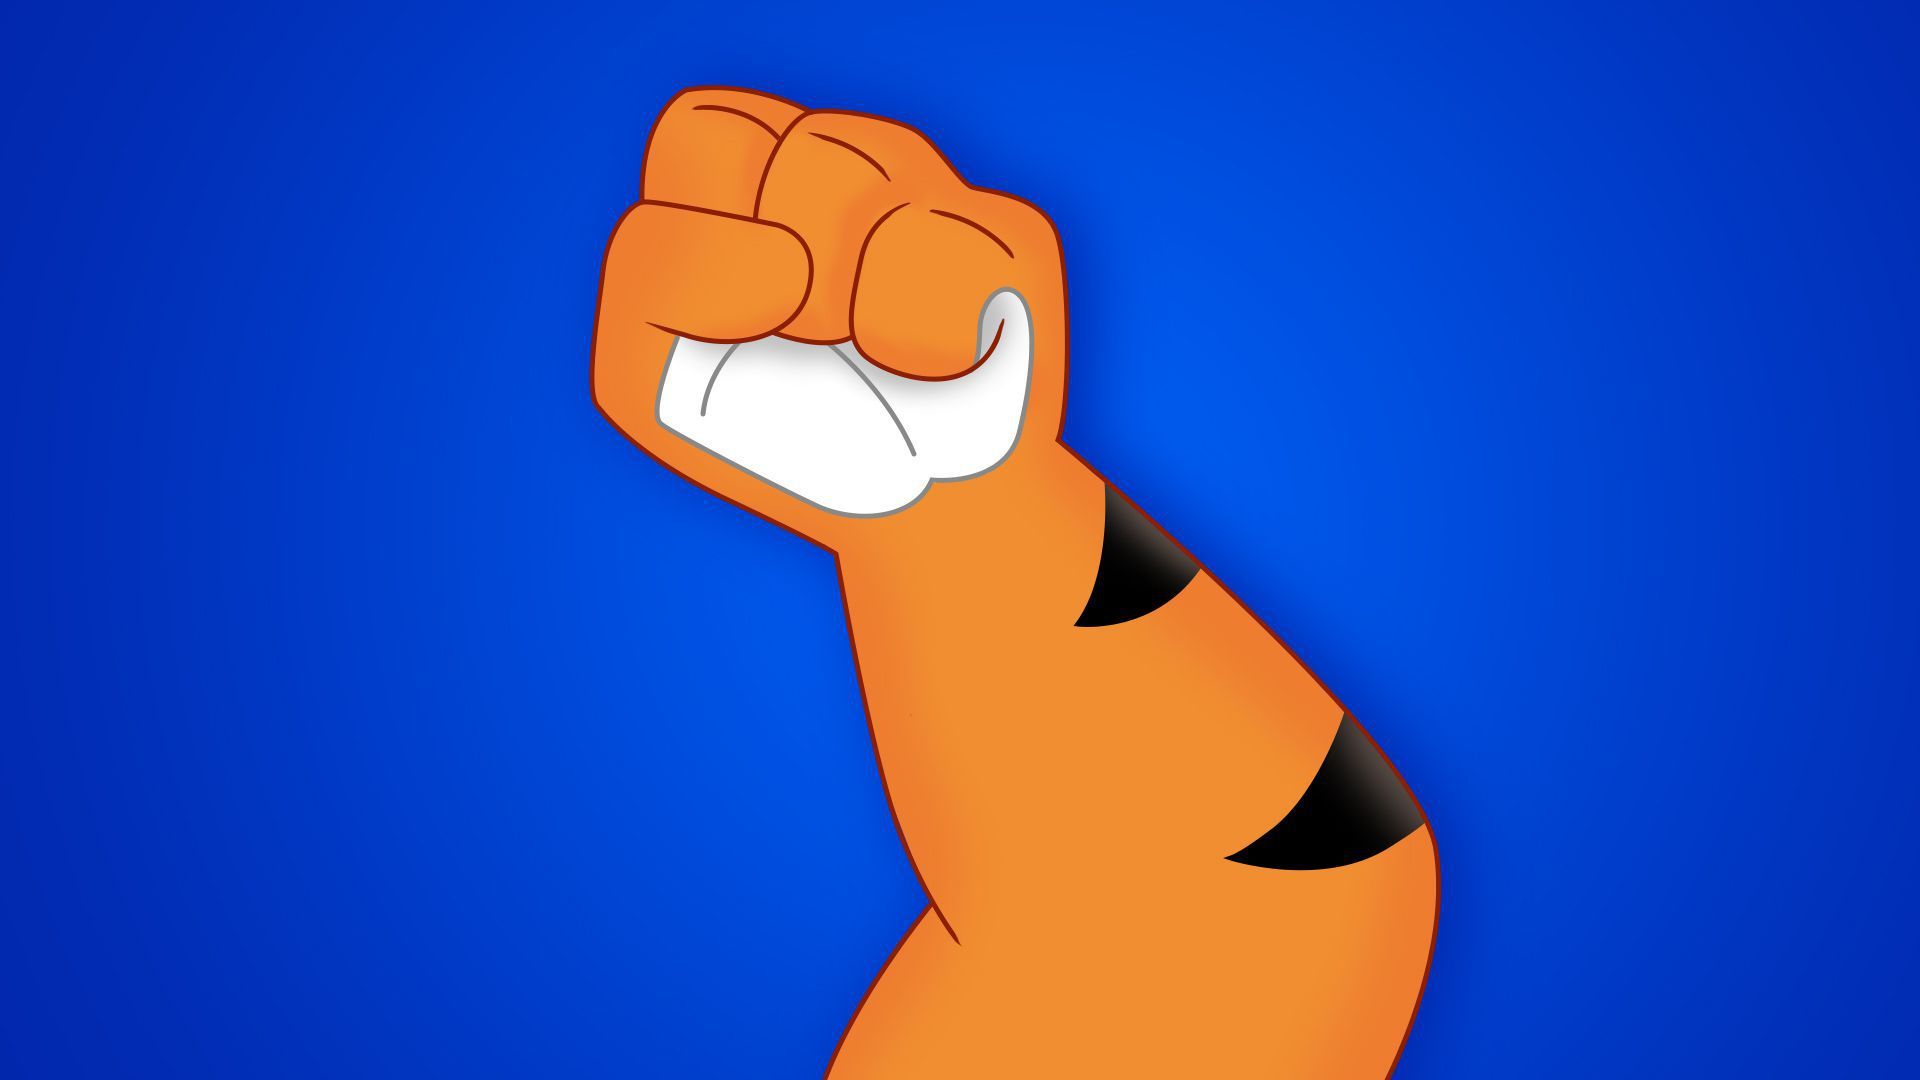 A tiger arm raised in a fist